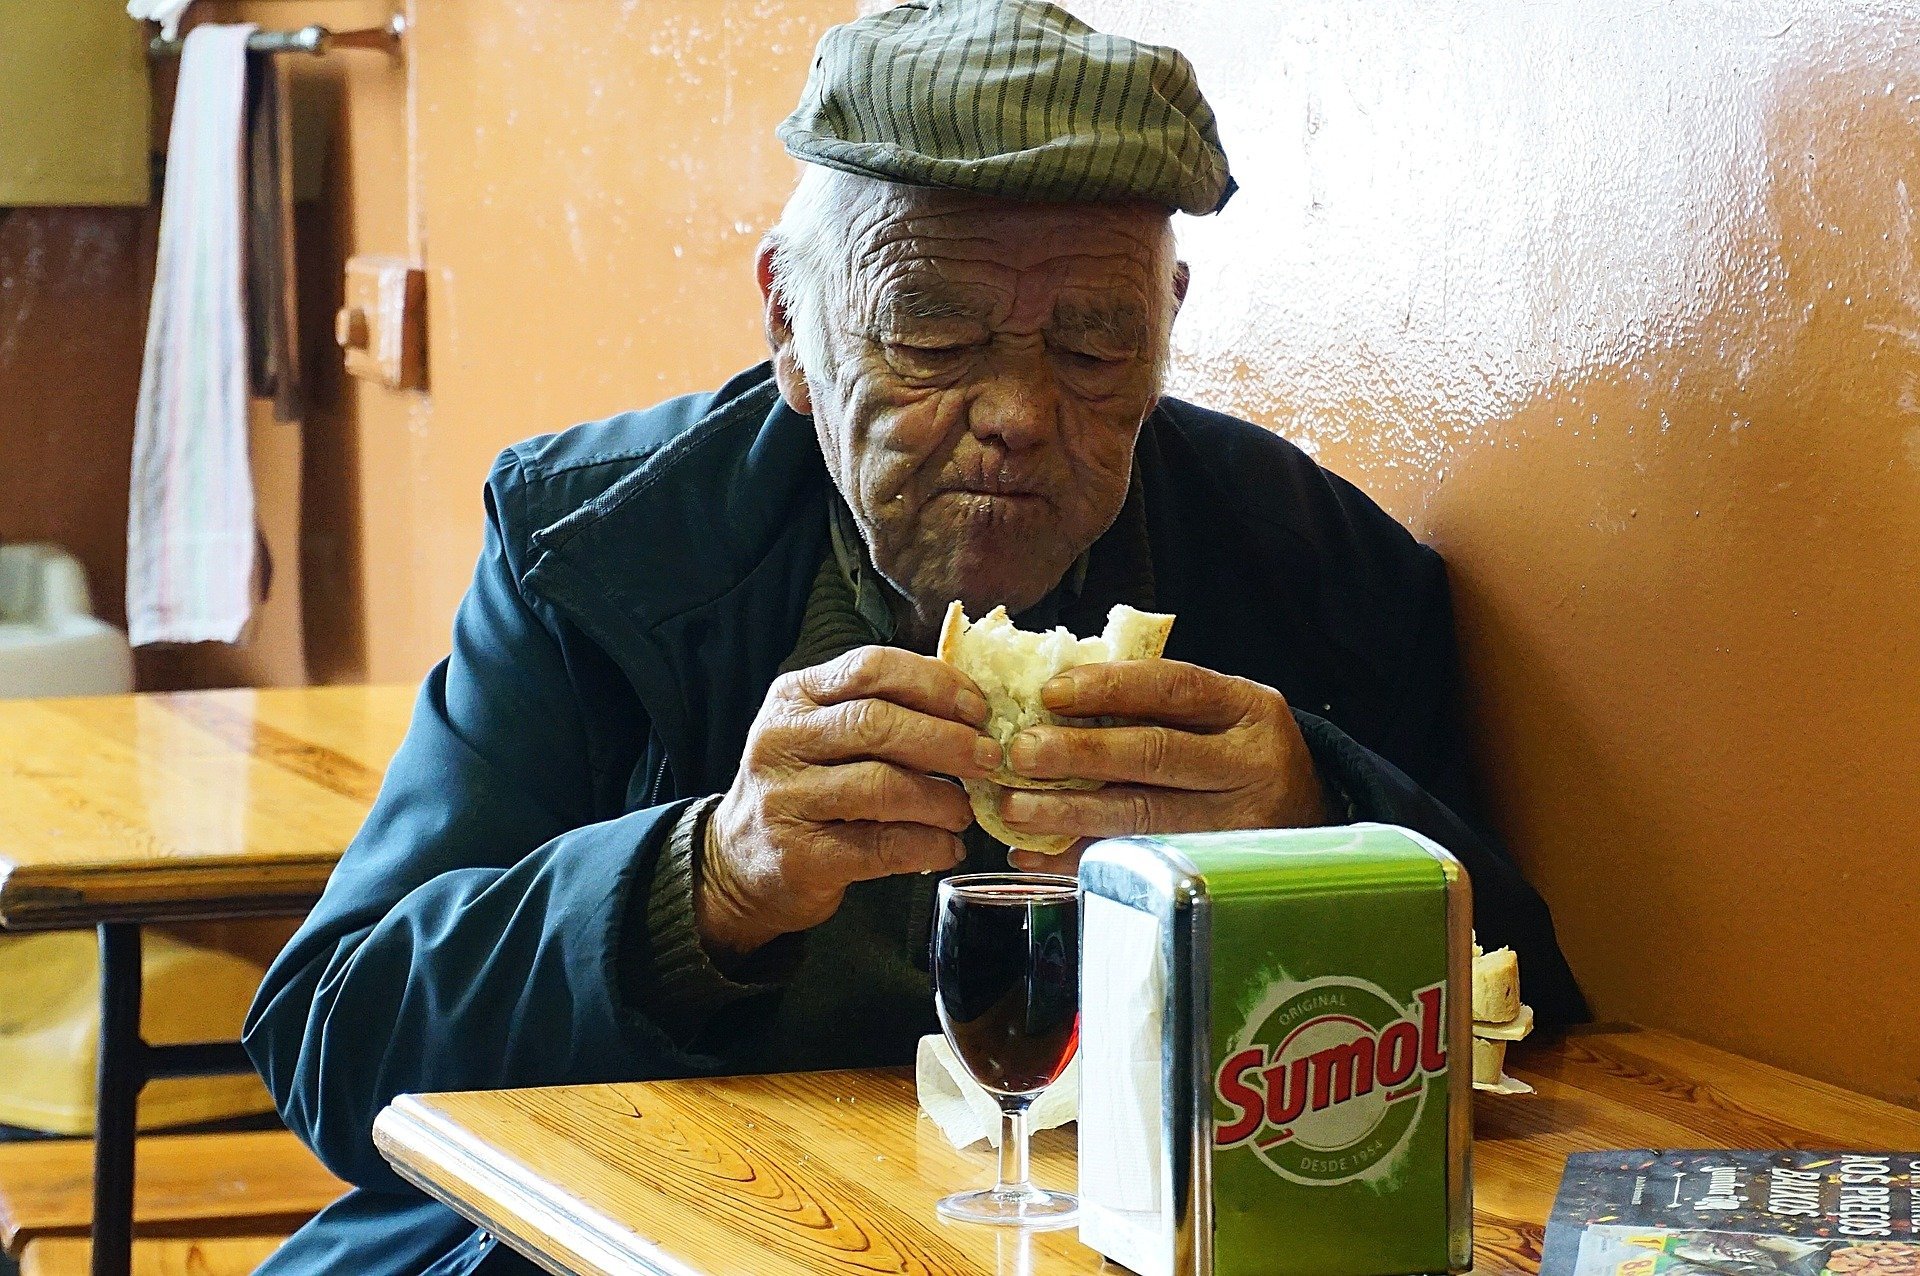 An old man sitting and eating a meal at a restaurant | Photo: Pixabay/Antonio Valente